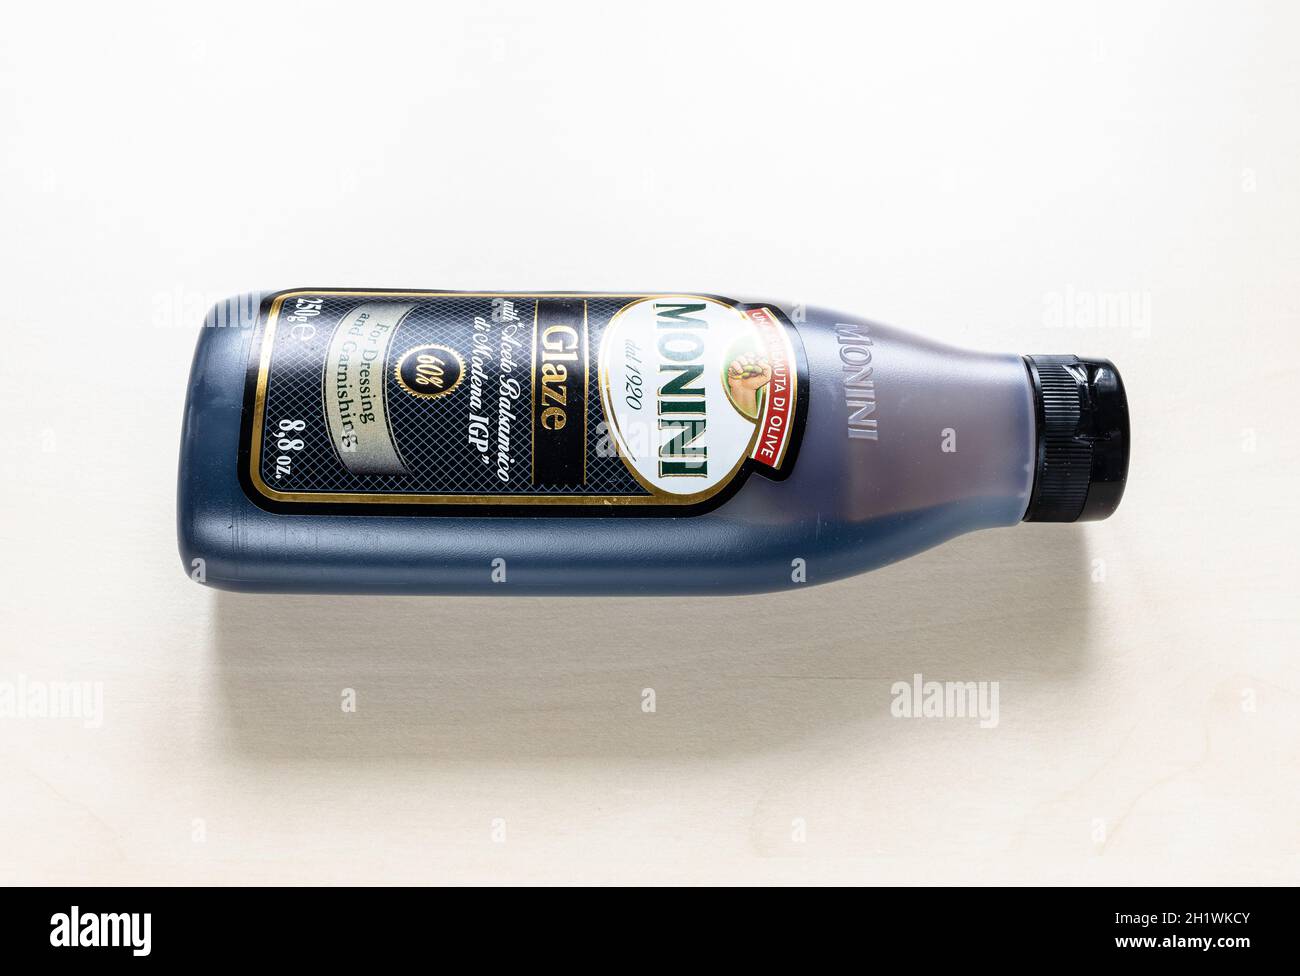 MOSCOW, RUSSIA - JUNE 10, 2021: lying bottle of Monini Glaze with Aceto Balsamico di Modena IGP on pale board. Glazes are the result of simmering the Stock Photo